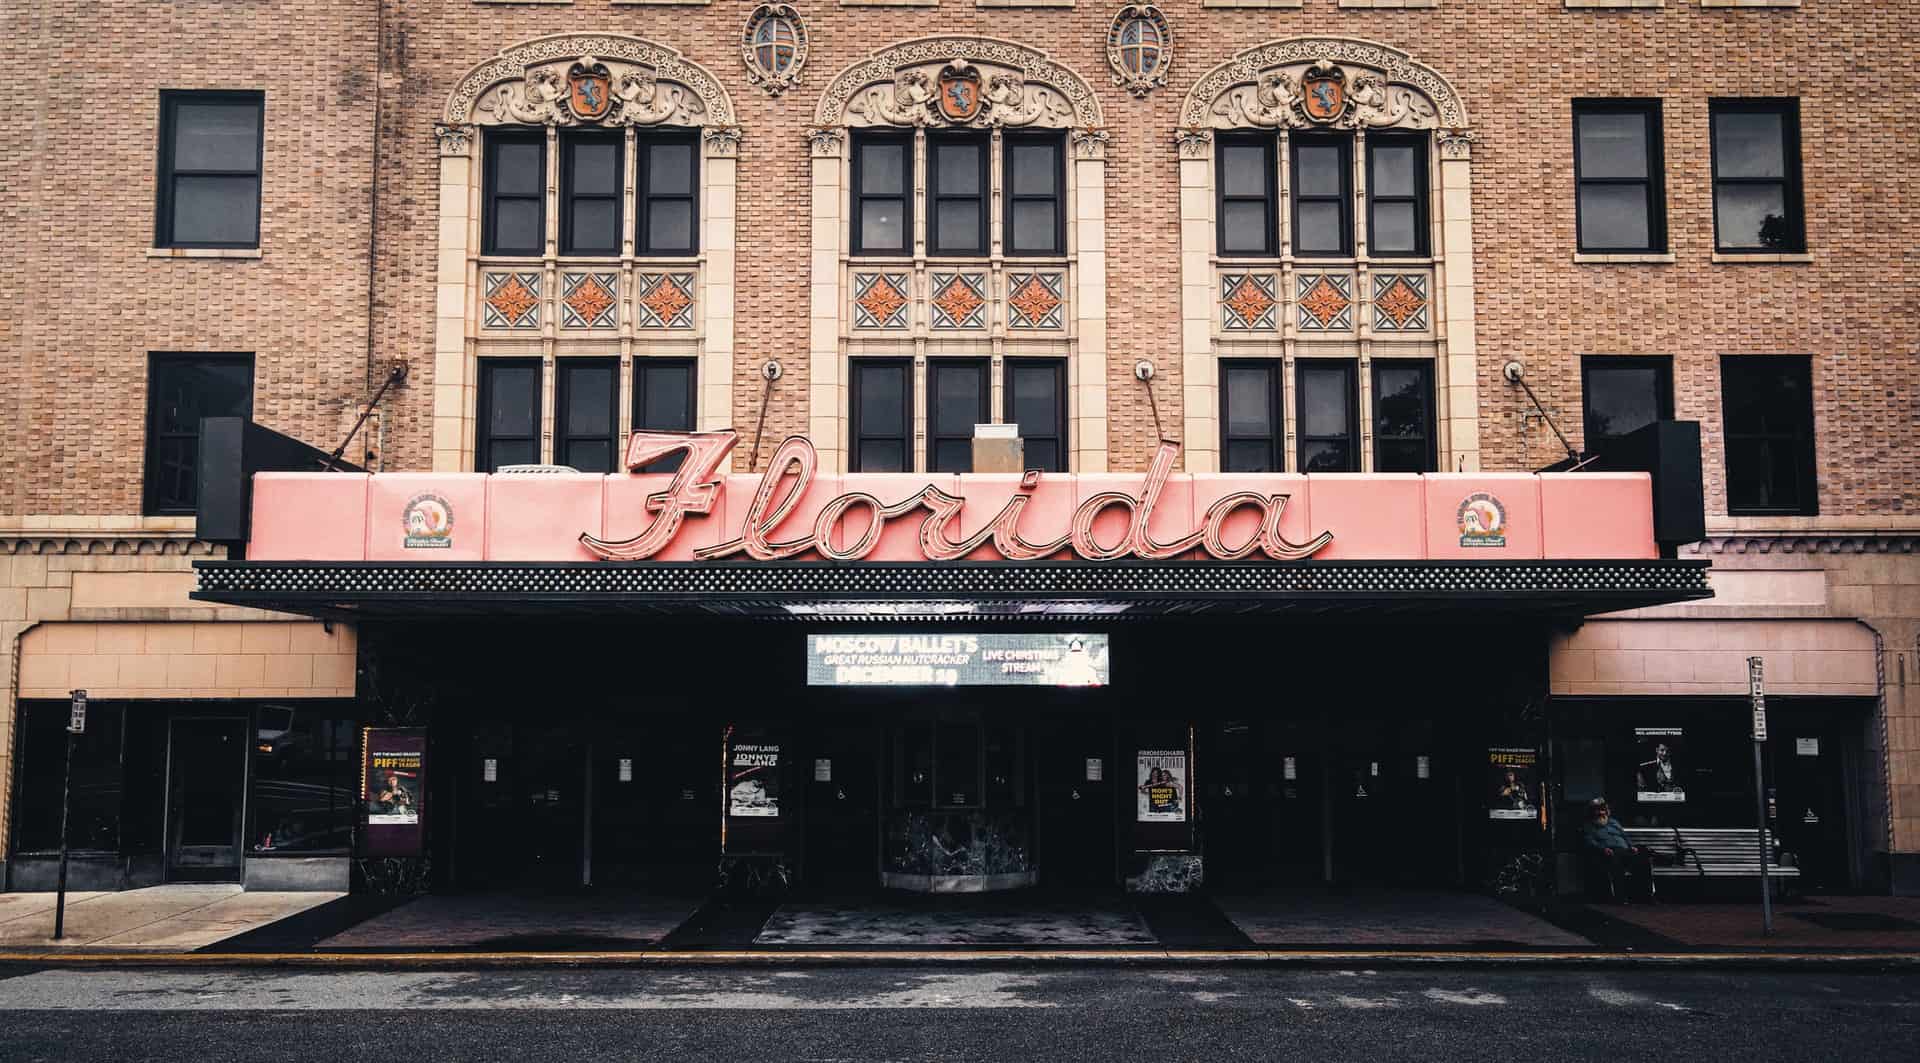 Best things to do in Jacksonville Florida - Ruby Escalona - Florida Theater by Trevor Neely on Unsplash